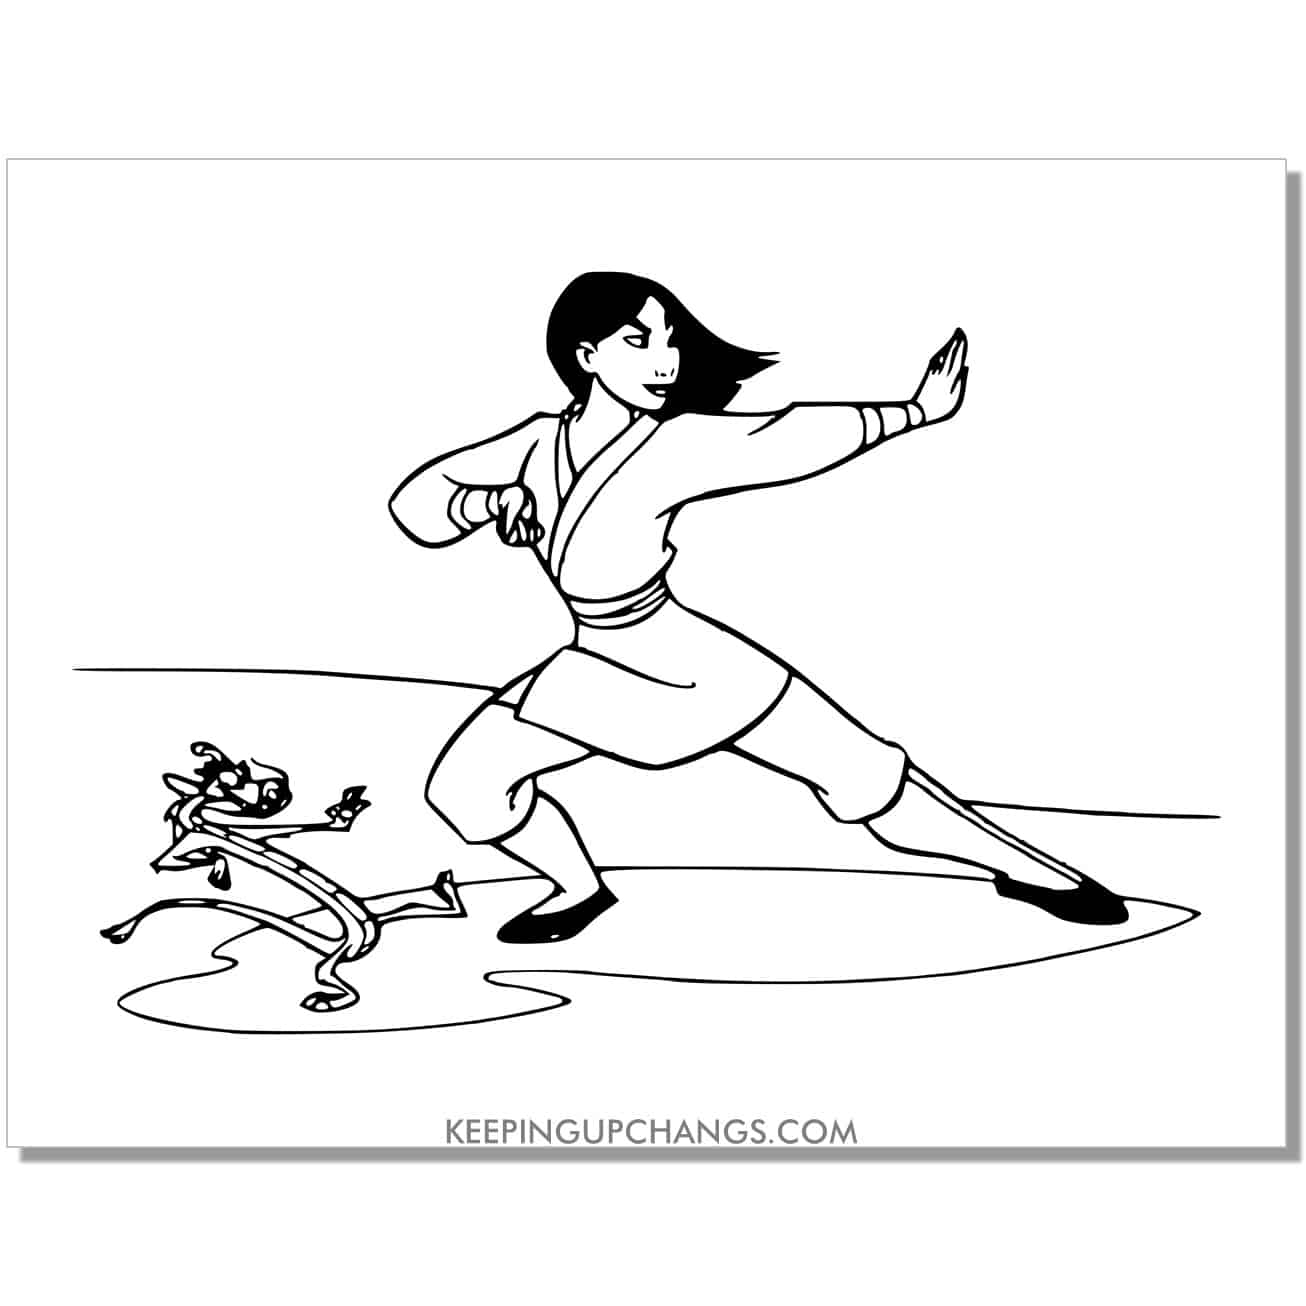 mulan training as soldier with mushu coloring page.